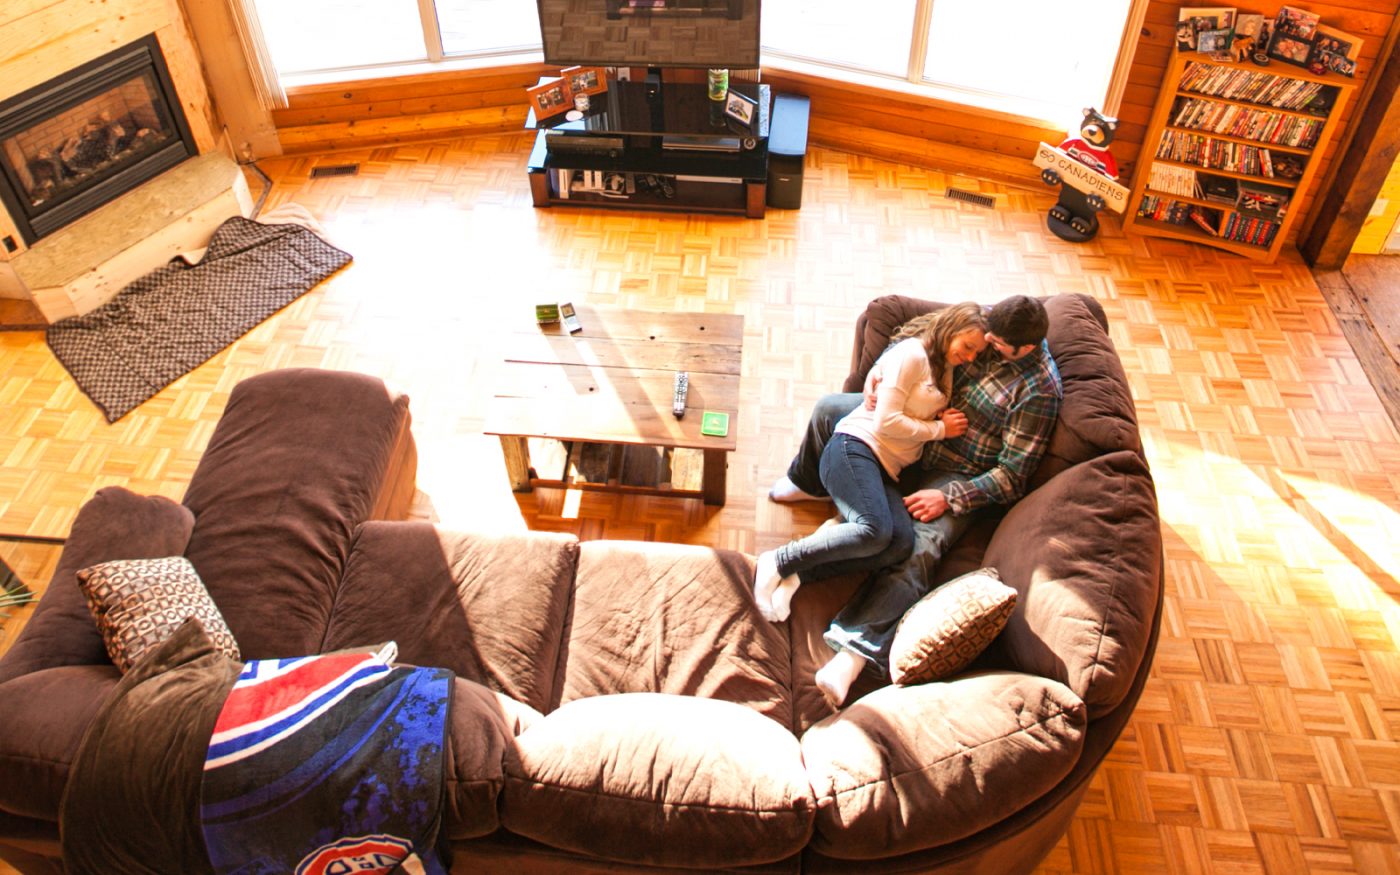 Leslie and Clayton cuddle on their couch in their cabin